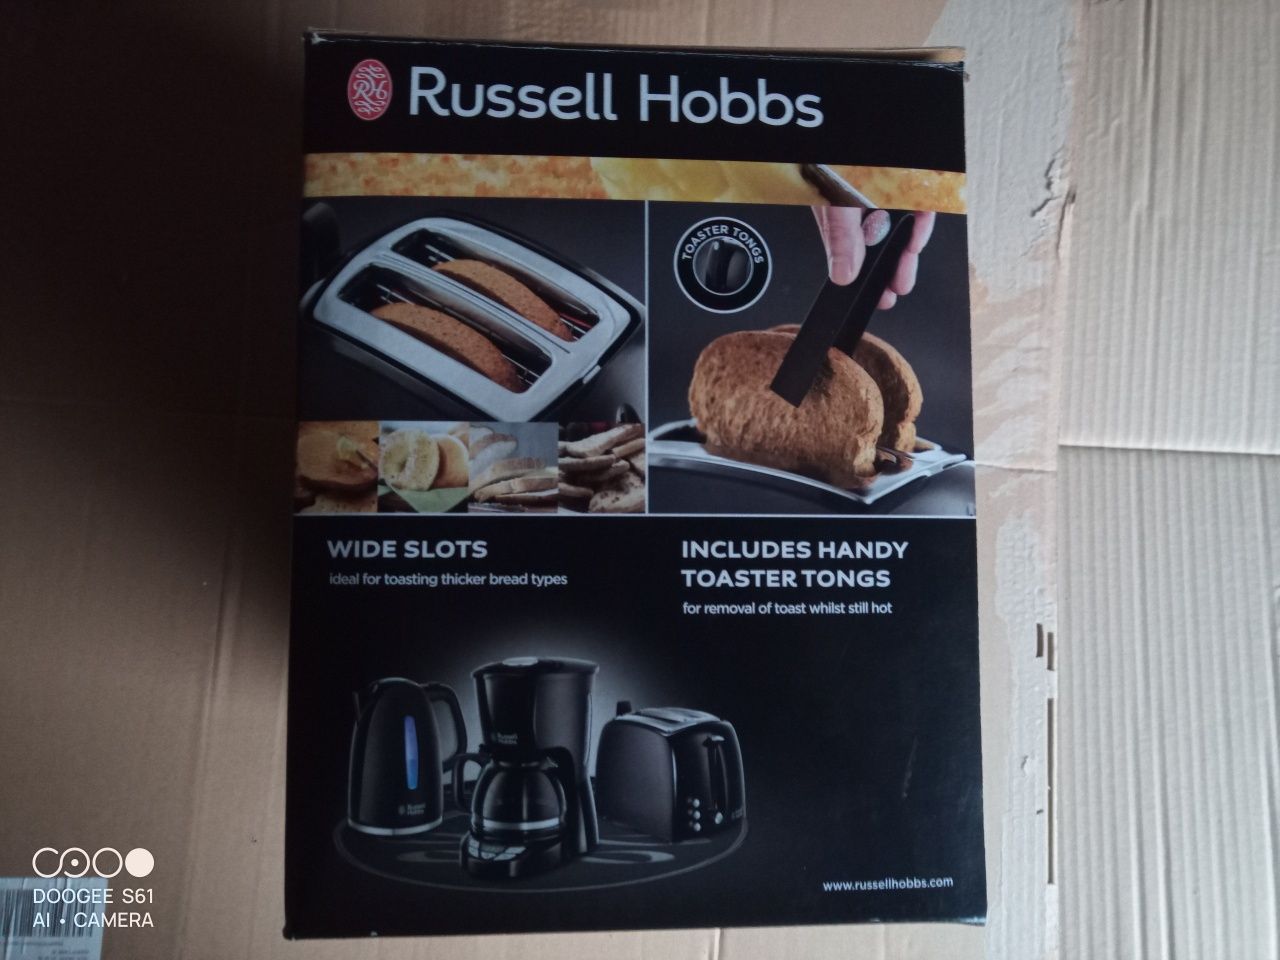 Toster Russell Hobbs